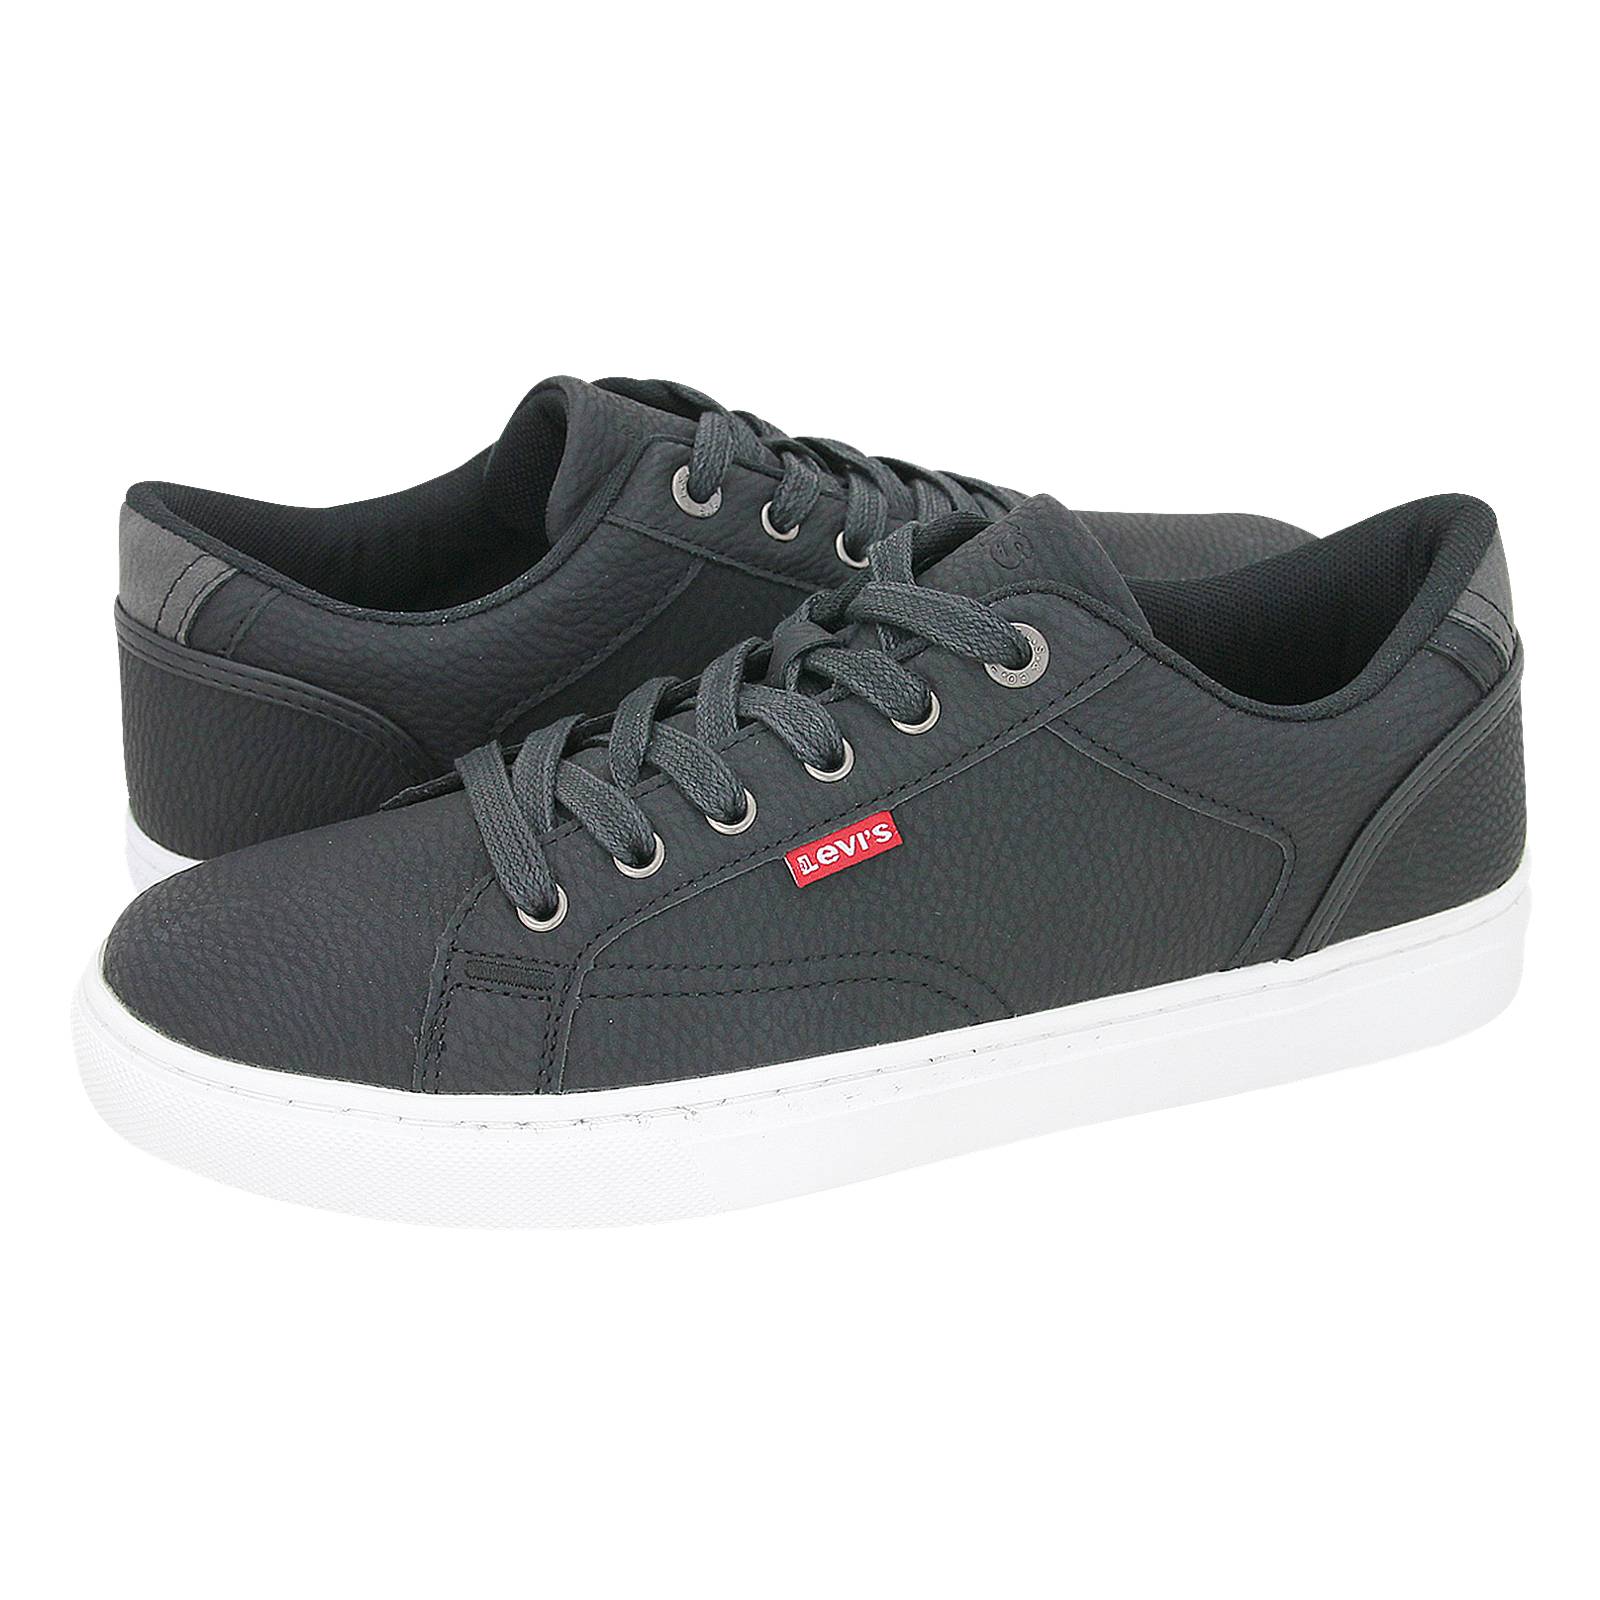 Courtright - Levi's Men's casual shoes made of synthetic leather - Gianna  Kazakou Online